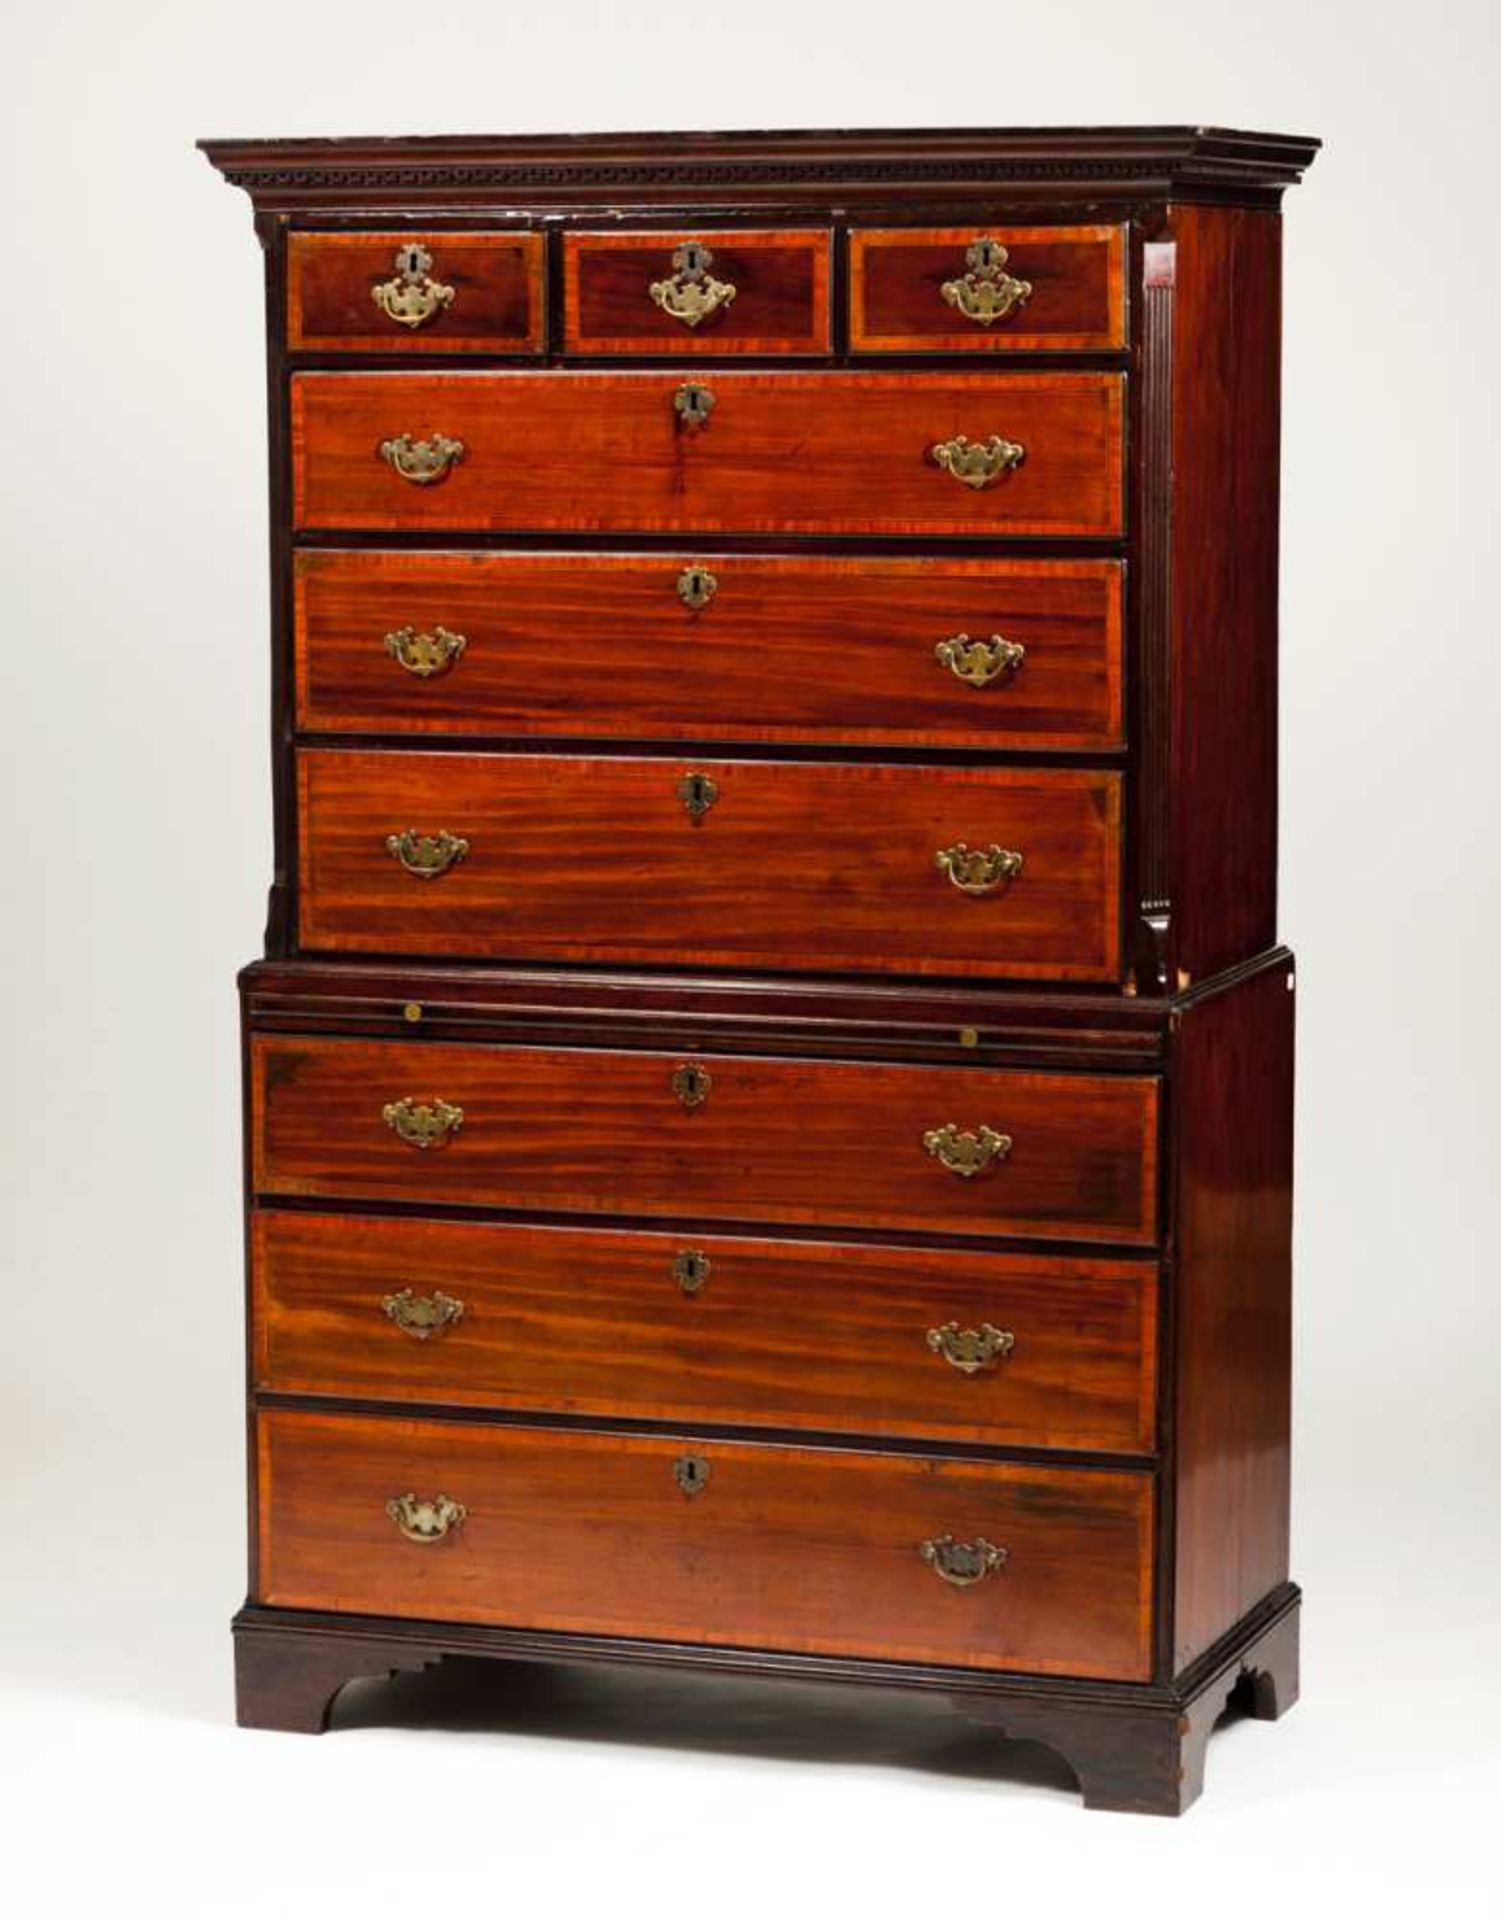 A George III style Tallboy Mahogany Root mahogany and hawthorn marquetry decoration Six long